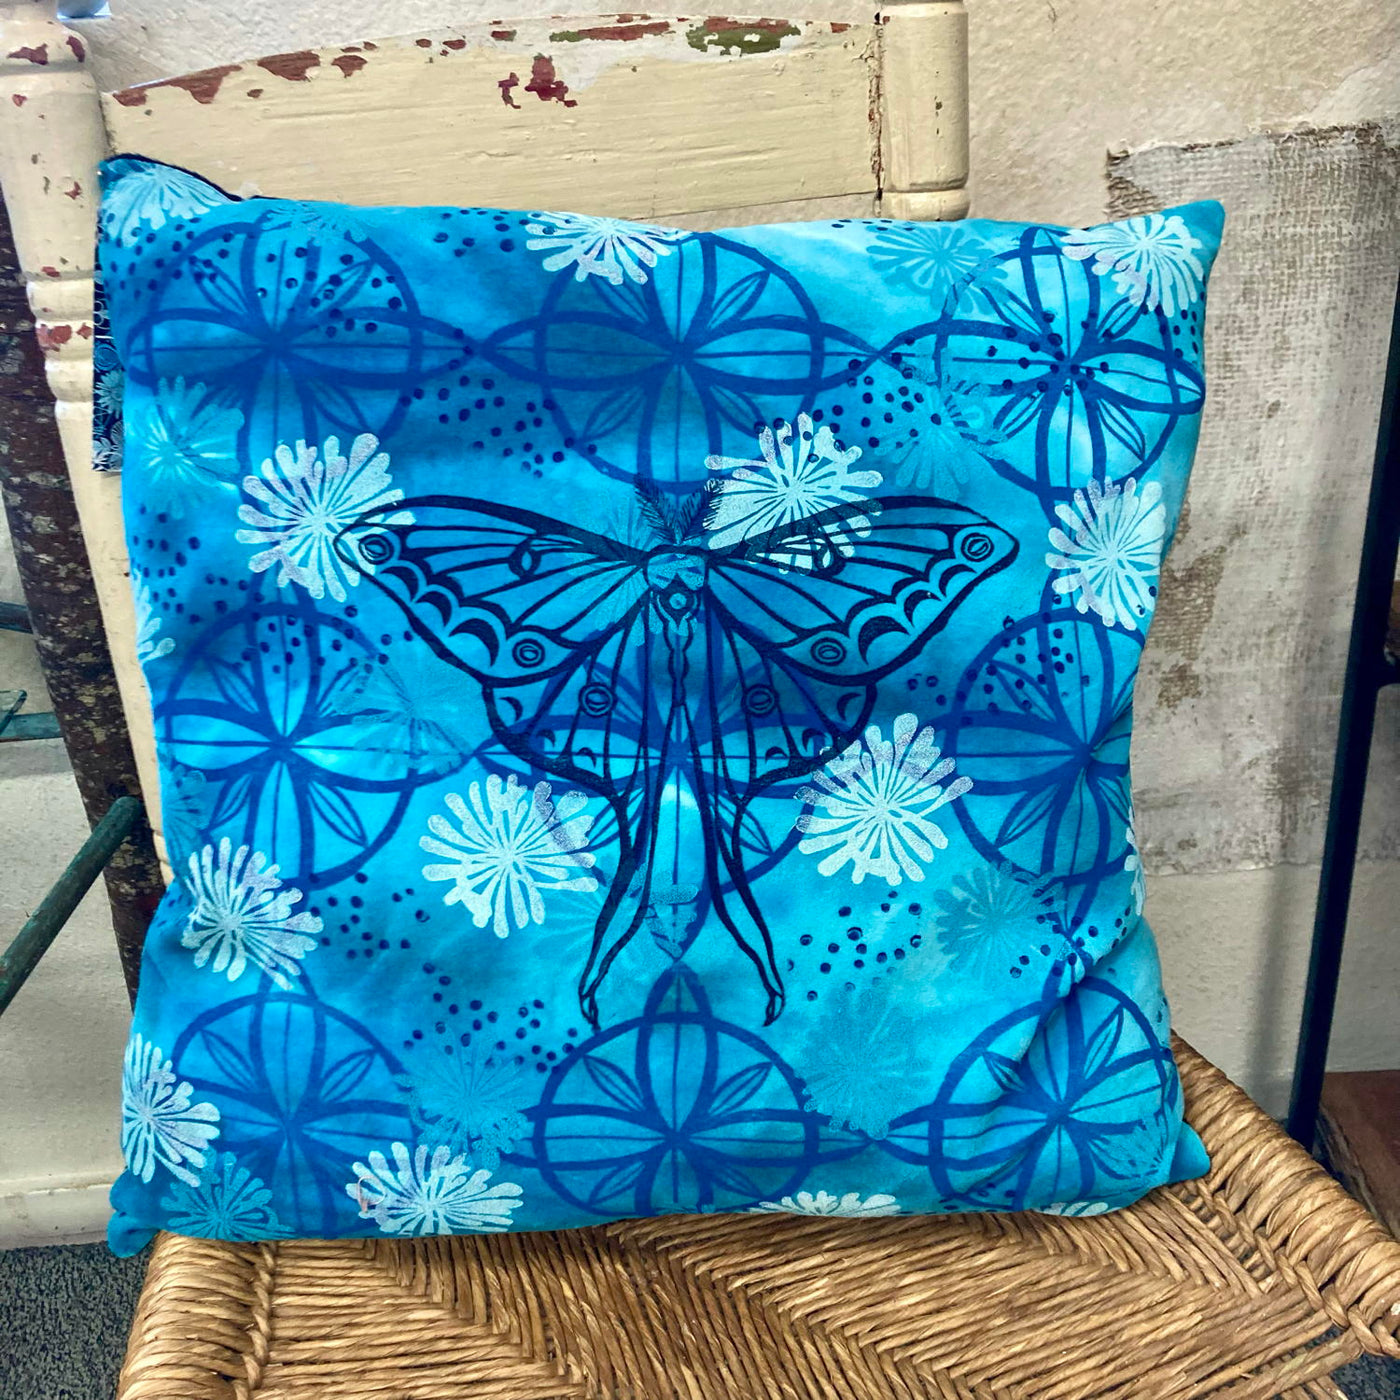 Block printed Blue Ice dyed pillows by Valori Wells